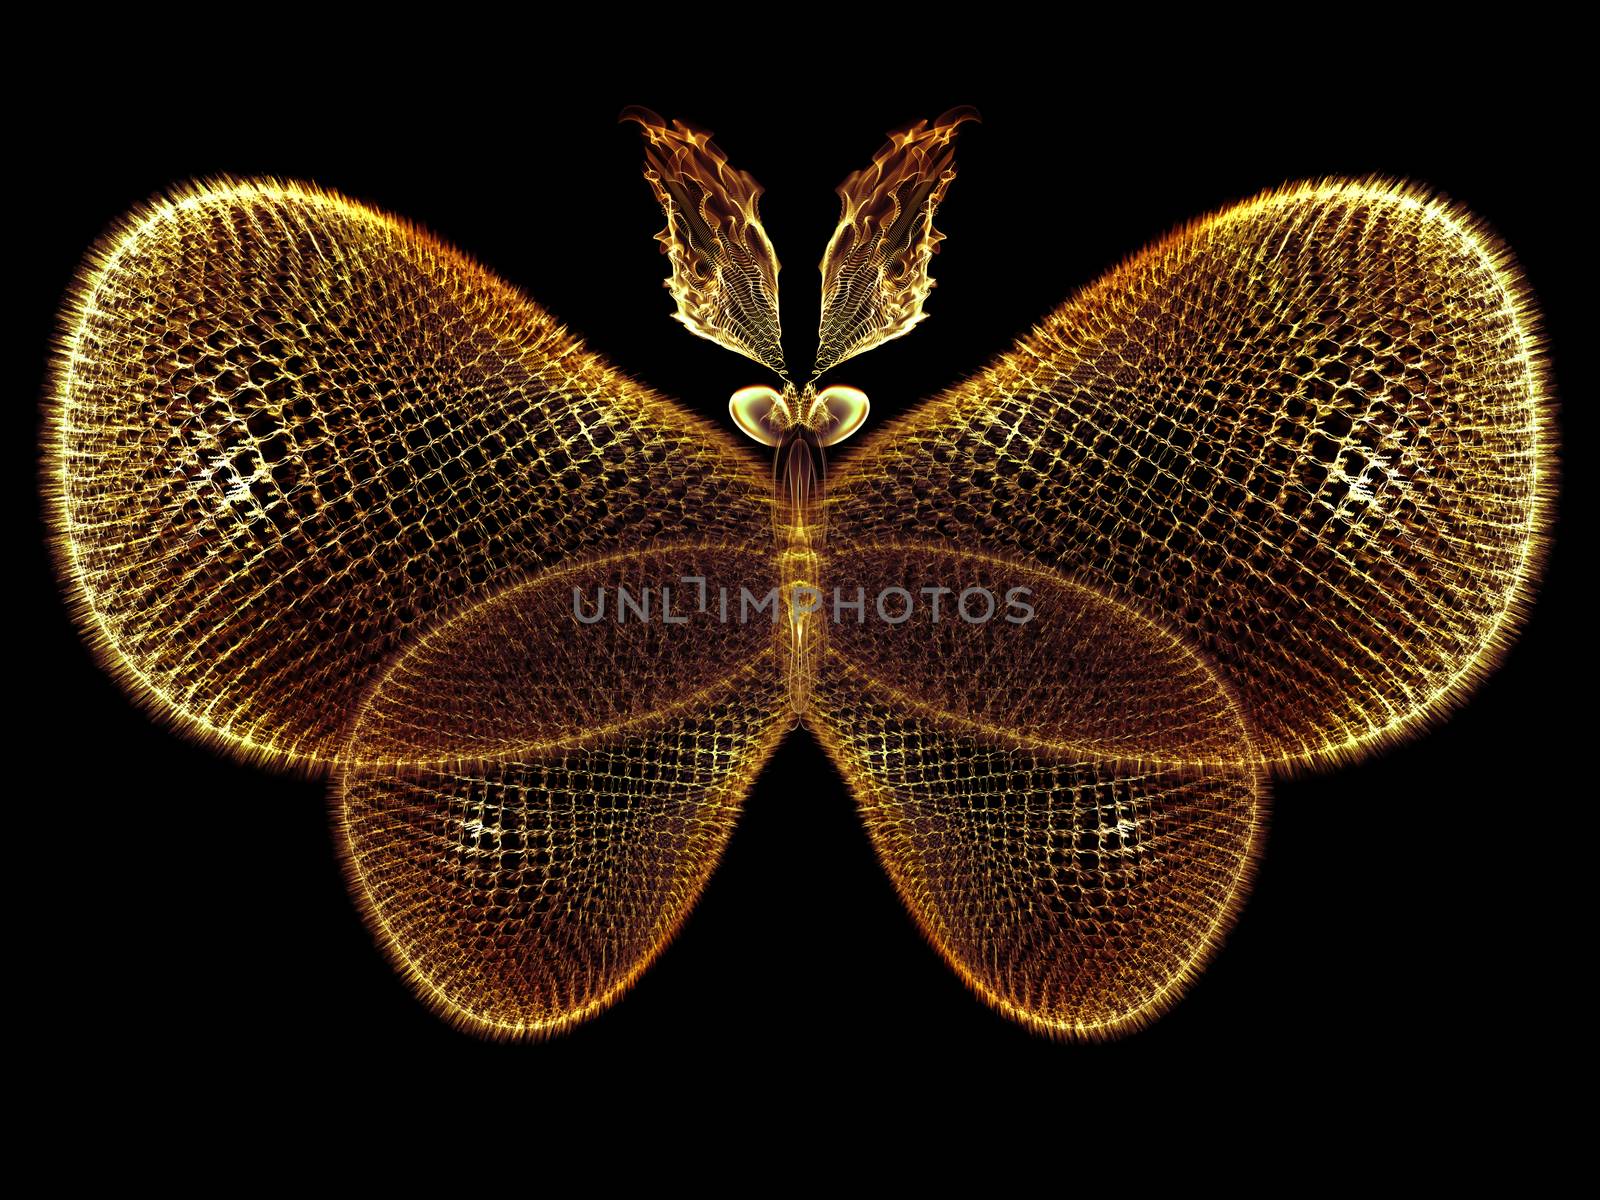 Never Were Butterflies series. Abstract arrangement of isolated butterfly patterns suitable as background for projects on science, imagination, creativity and design